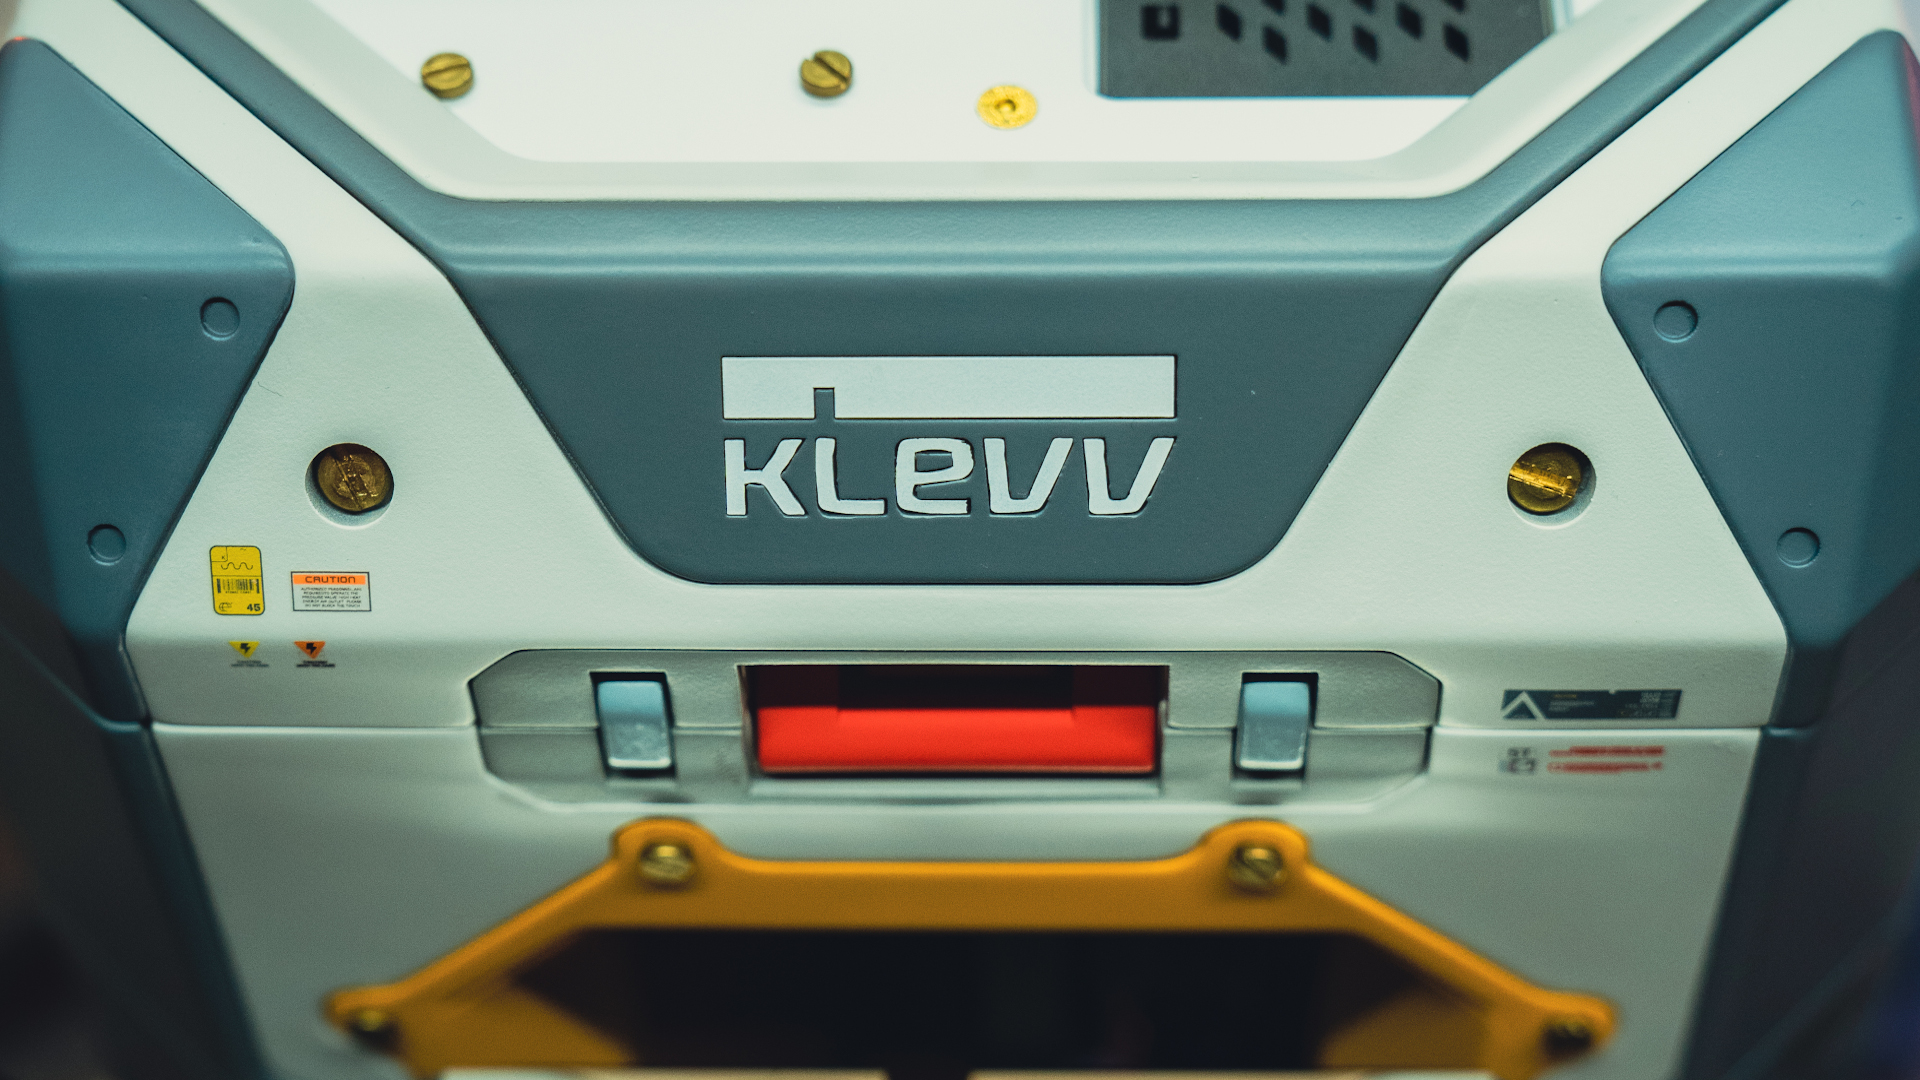 The front of the space themed PC build which is called Klevv